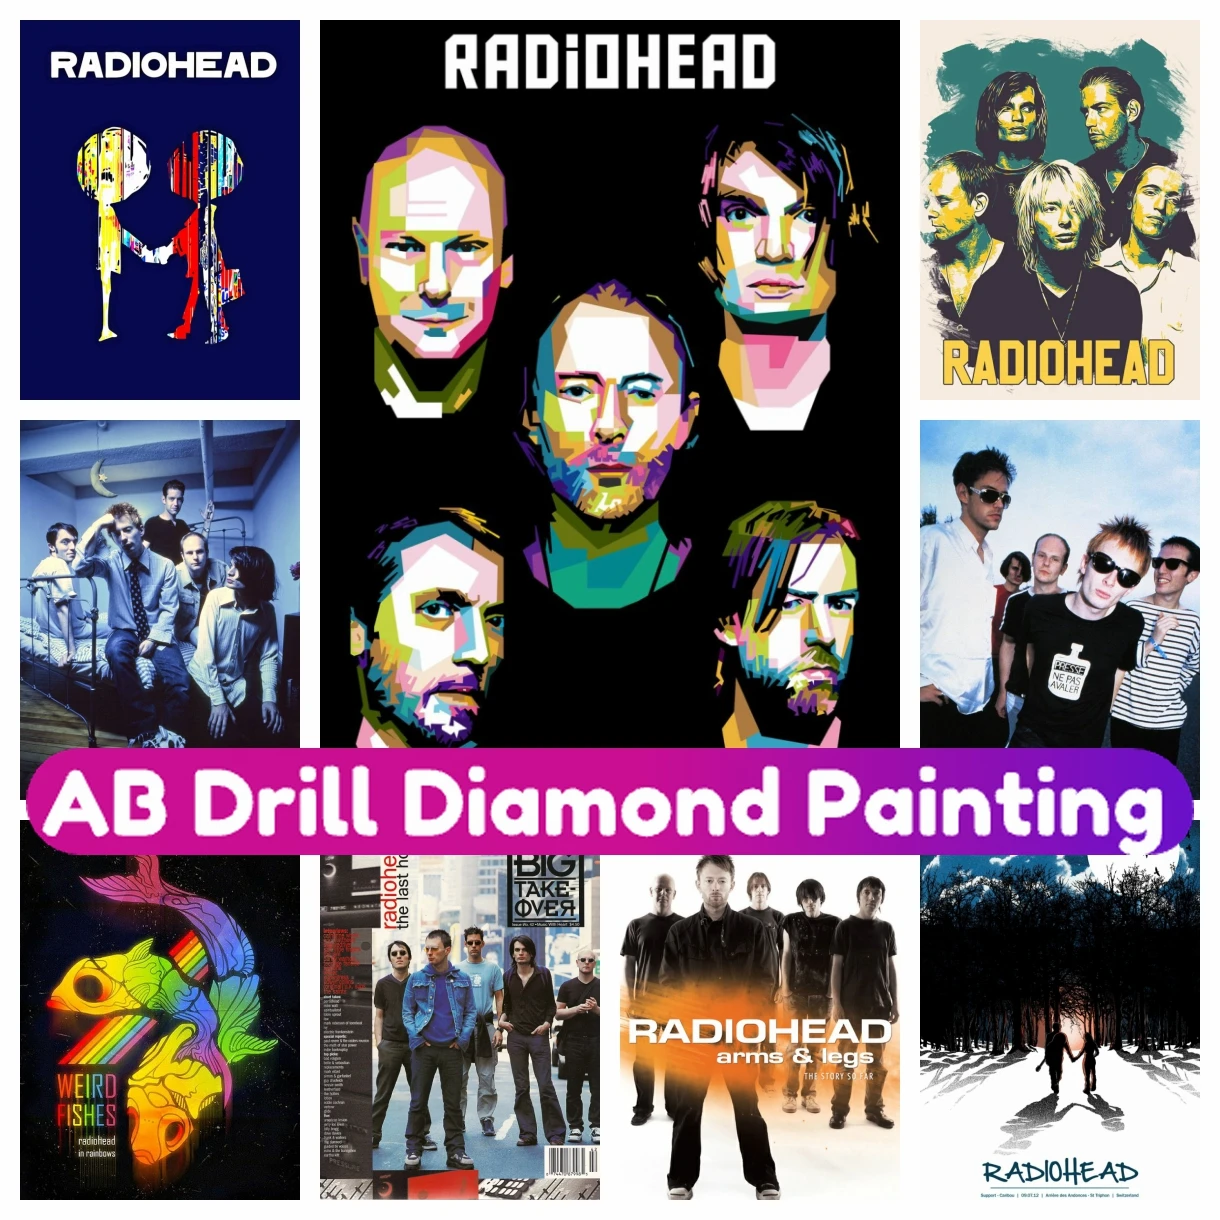 

Rock Band Radiohead Music AB Diamond Painting Cross Stitch Kit Mosaic Embroidery Full Drill Square Round 5D DIY Home Decor Gift